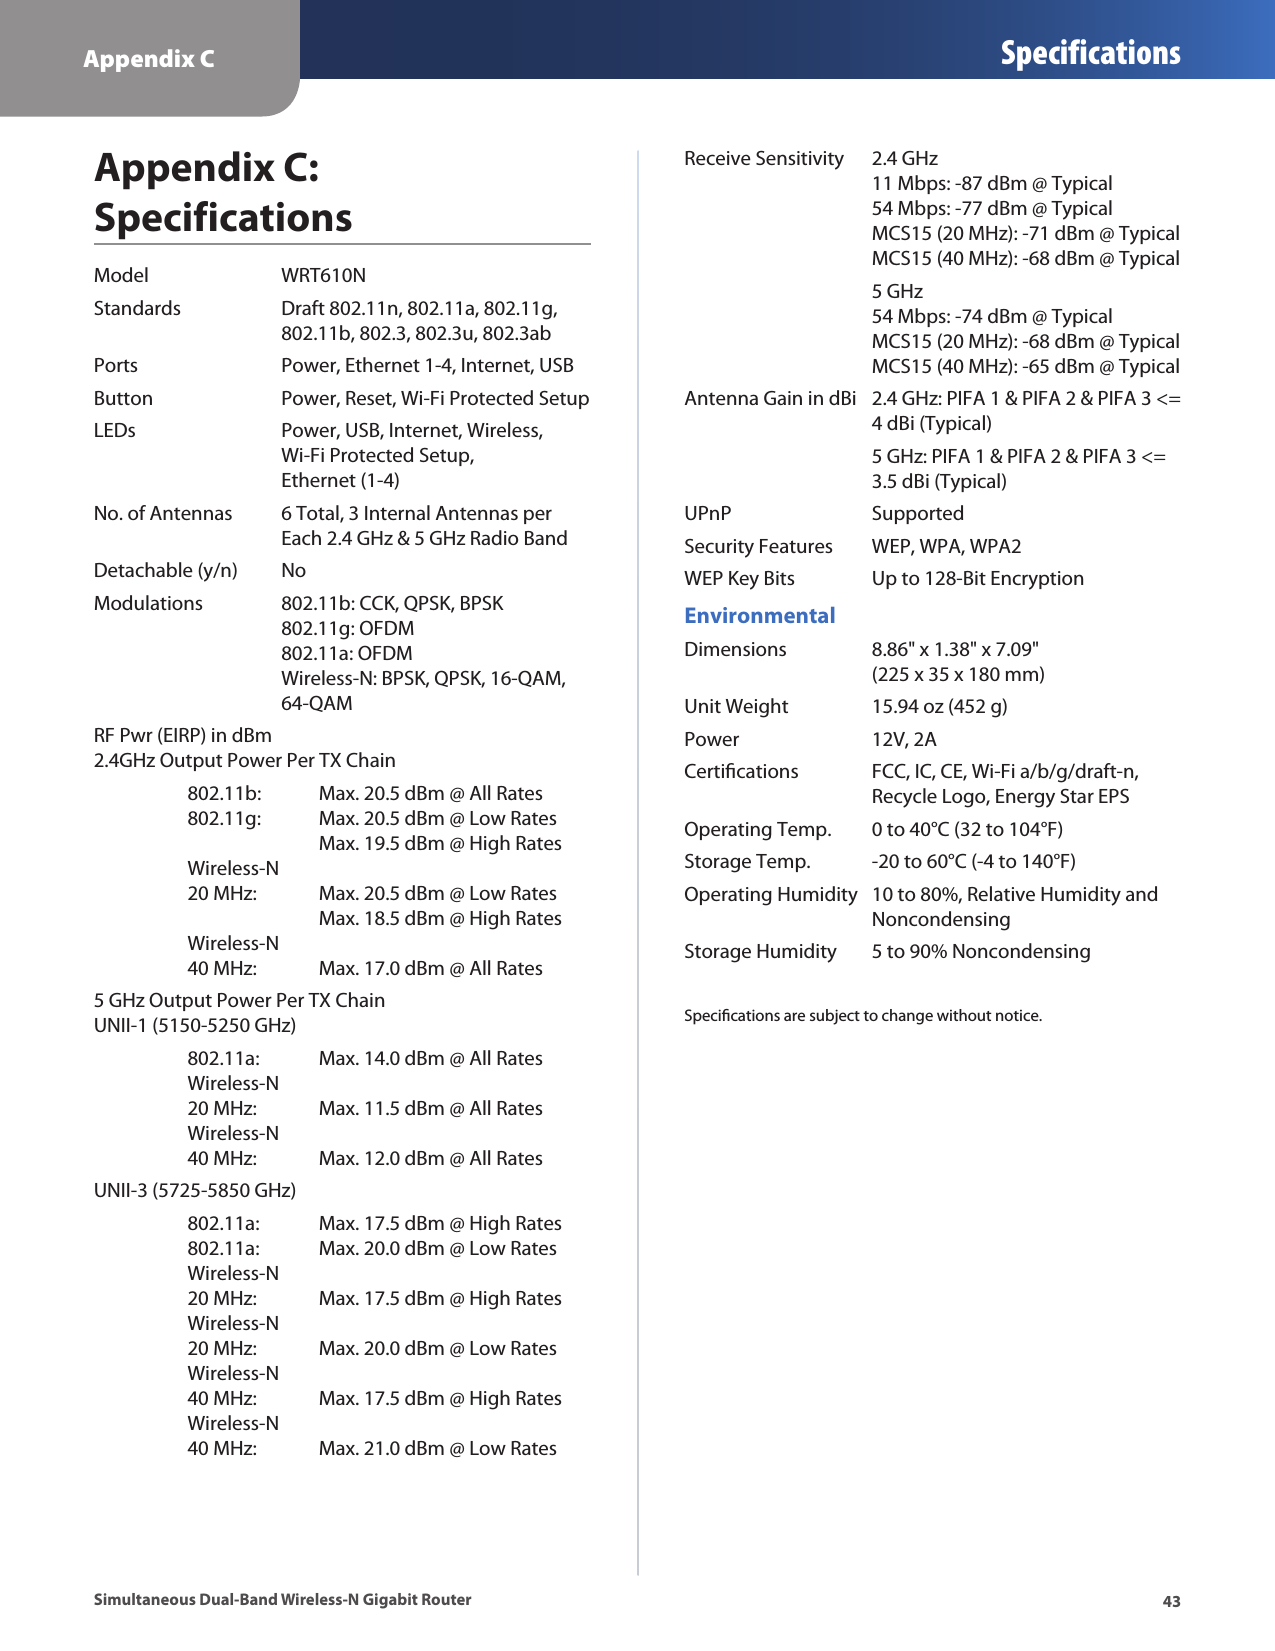 Appendix C Specifications43Simultaneous Dual-Band Wireless-N Gigabit RouterAppendix C:  SpecificationsModel  WRT610NStandards  Draft 802.11n, 802.11a, 802.11g,   802.11b, 802.3, 802.3u, 802.3abPorts  Power, Ethernet 1-4, Internet, USBButton  Power, Reset, Wi-Fi Protected SetupLEDs  Power, USB, Internet, Wireless,   Wi-Fi Protected Setup,   Ethernet (1-4)No. of Antennas  6 Total, 3 Internal Antennas per    Each 2.4 GHz &amp; 5 GHz Radio BandDetachable (y/n)  NoModulations  802.11b: CCK, QPSK, BPSK    802.11g: OFDM   802.11a: OFDM   Wireless-N: BPSK, QPSK, 16-QAM,   64-QAMRF Pwr (EIRP) in dBm 2.4GHz Output Power Per TX Chain  802.11b:  Max. 20.5 dBm @ All Rates   802.11g:   Max. 20.5 dBm @ Low Rates       Max. 19.5 dBm @ High Rates   Wireless-N    20 MHz:  Max. 20.5 dBm @ Low Rates       Max. 18.5 dBm @ High Rates   Wireless-N    40 MHz:  Max. 17.0 dBm @ All Rates5 GHz Output Power Per TX Chain UNII-1 (5150-5250 GHz)  802.11a:  Max. 14.0 dBm @ All Rates   Wireless-N    20 MHz:  Max. 11.5 dBm @ All Rates   Wireless-N    40 MHz:   Max. 12.0 dBm @ All RatesUNII-3 (5725-5850 GHz)  802.11a:  Max. 17.5 dBm @ High Rates   802.11a:   Max. 20.0 dBm @ Low Rates   Wireless-N    20 MHz:  Max. 17.5 dBm @ High Rates   Wireless-N    20 MHz:  Max. 20.0 dBm @ Low Rates   Wireless-N    40 MHz:  Max. 17.5 dBm @ High Rates   Wireless-N    40 MHz:  Max. 21.0 dBm @ Low RatesReceive Sensitivity  2.4 GHz   11 Mbps: -87 dBm @ Typical   54 Mbps: -77 dBm @ Typical   MCS15 (20 MHz): -71 dBm @ Typical   MCS15 (40 MHz): -68 dBm @ Typical  5 GHz   54 Mbps: -74 dBm @ Typical   MCS15 (20 MHz): -68 dBm @ Typical   MCS15 (40 MHz): -65 dBm @ TypicalAntenna Gain in dBi  2.4 GHz: PIFA 1 &amp; PIFA 2 &amp; PIFA 3 &lt;=   4 dBi (Typical)  5 GHz: PIFA 1 &amp; PIFA 2 &amp; PIFA 3 &lt;=   3.5 dBi (Typical)UPnP   SupportedSecurity Features  WEP, WPA, WPA2WEP Key Bits  Up to 128-Bit EncryptionEnvironmentalDimensions  8.86&quot; x 1.38&quot; x 7.09&quot;   (225 x 35 x 180 mm)Unit Weight  15.94 oz (452 g)Power  12V, 2ACertiﬁcations  FCC, IC, CE, Wi-Fi a/b/g/draft-n,    Recycle Logo, Energy Star EPSOperating Temp.  0 to 40°C (32 to 104°F)Storage Temp.  -20 to 60°C (-4 to 140°F)Operating Humidity  10 to 80%, Relative Humidity and    NoncondensingStorage Humidity  5 to 90% NoncondensingSpeciﬁcations are subject to change without notice.